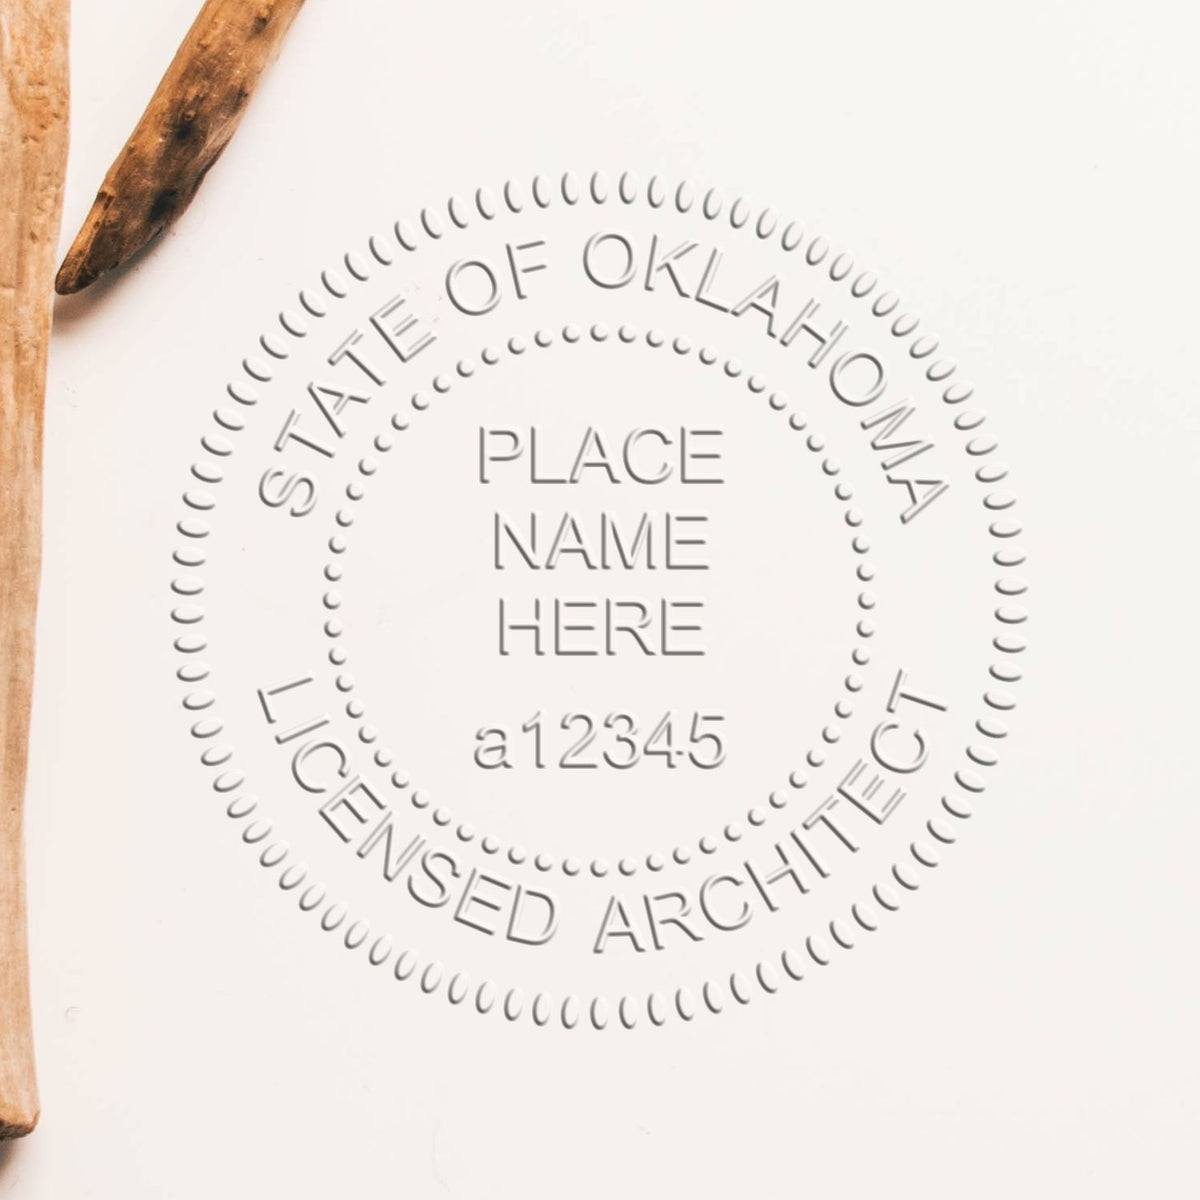 A stamped impression of the Oklahoma Desk Architect Embossing Seal in this stylish lifestyle photo, setting the tone for a unique and personalized product.